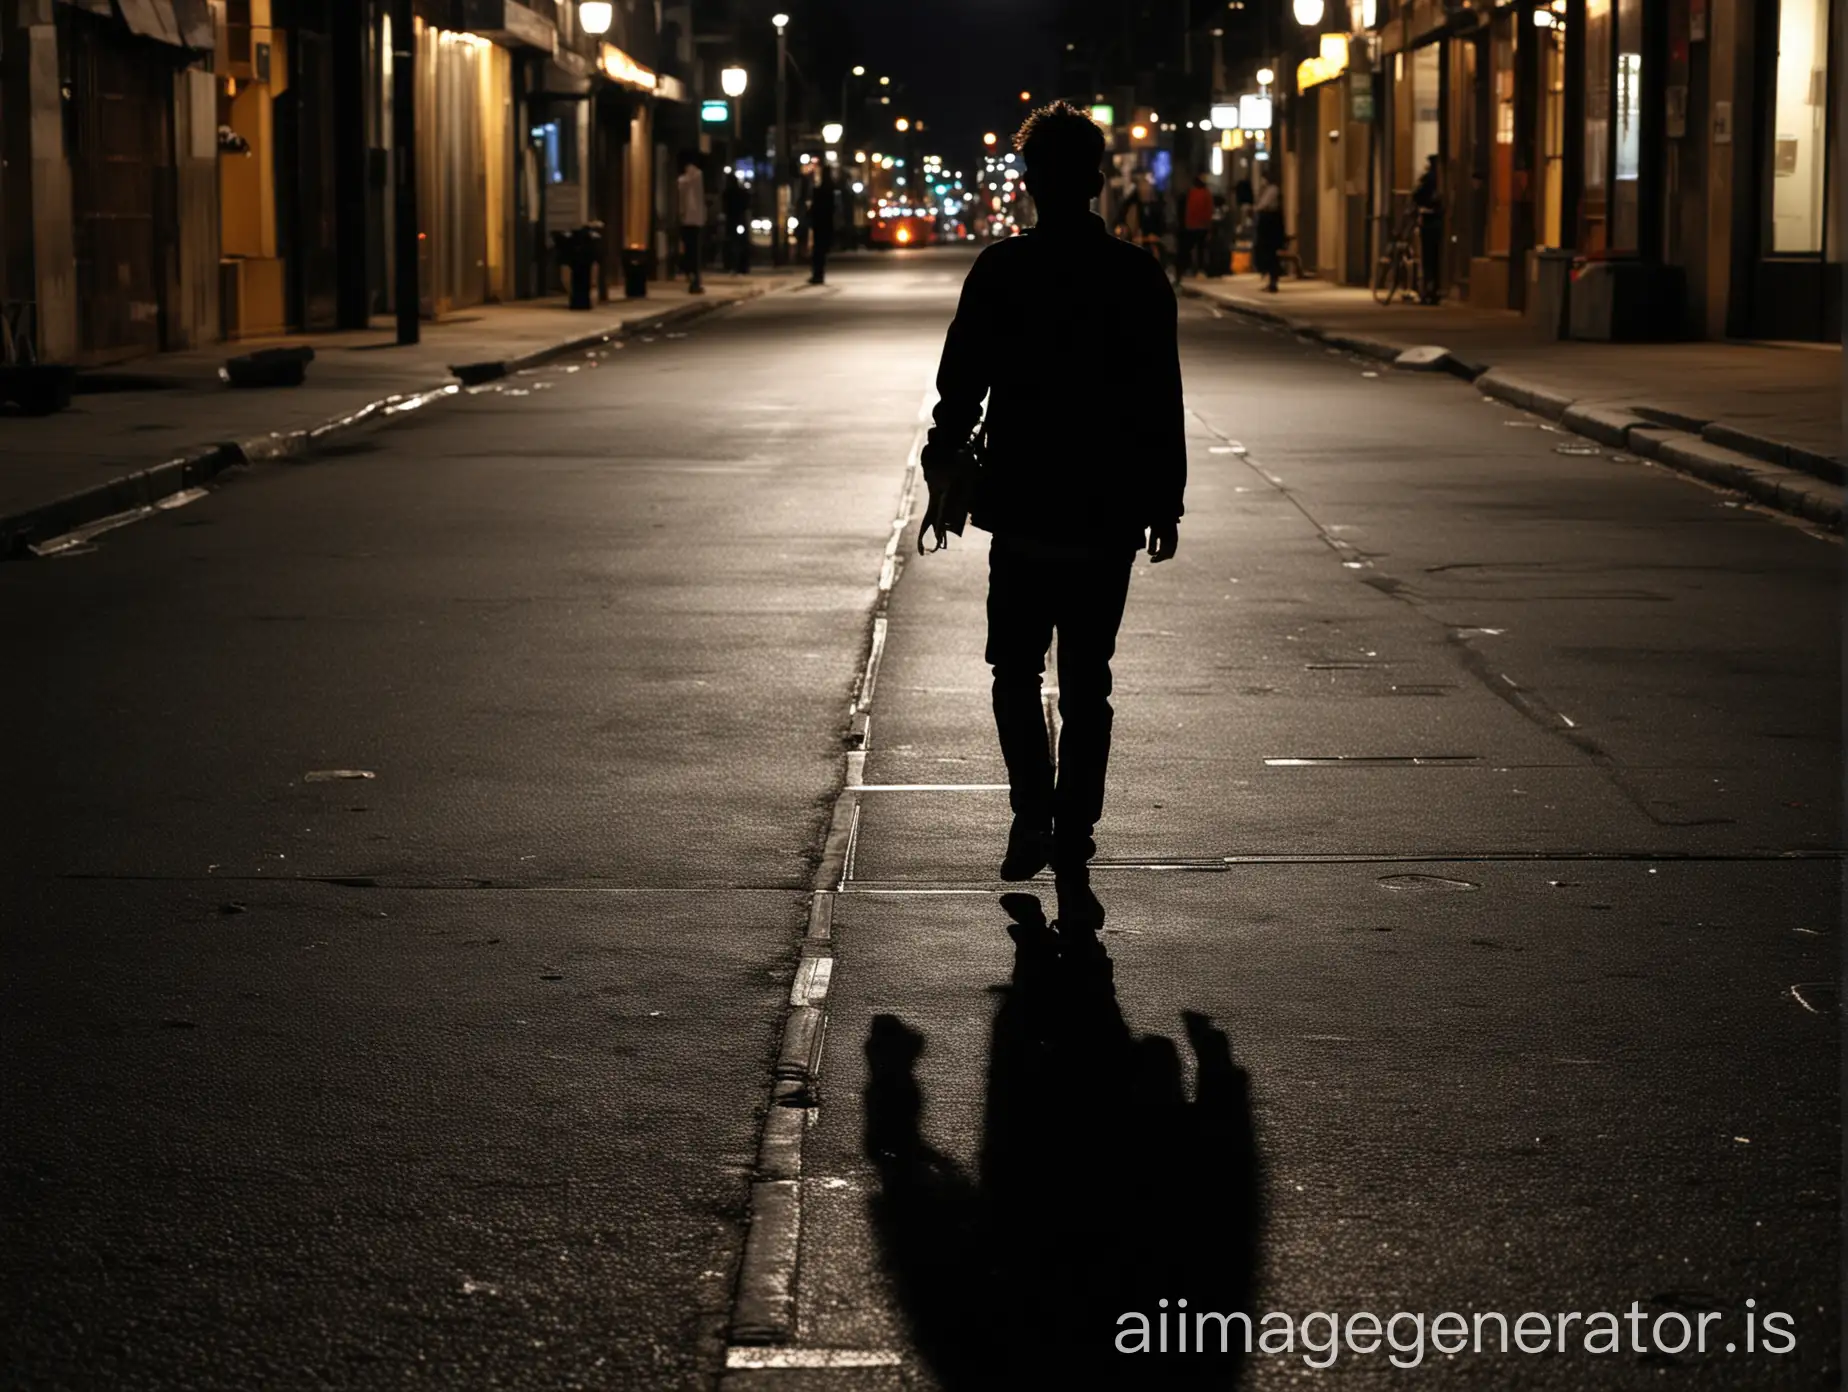 Lost-in-the-City-A-Young-Man-Seeking-Self-in-Urban-Nightscapes